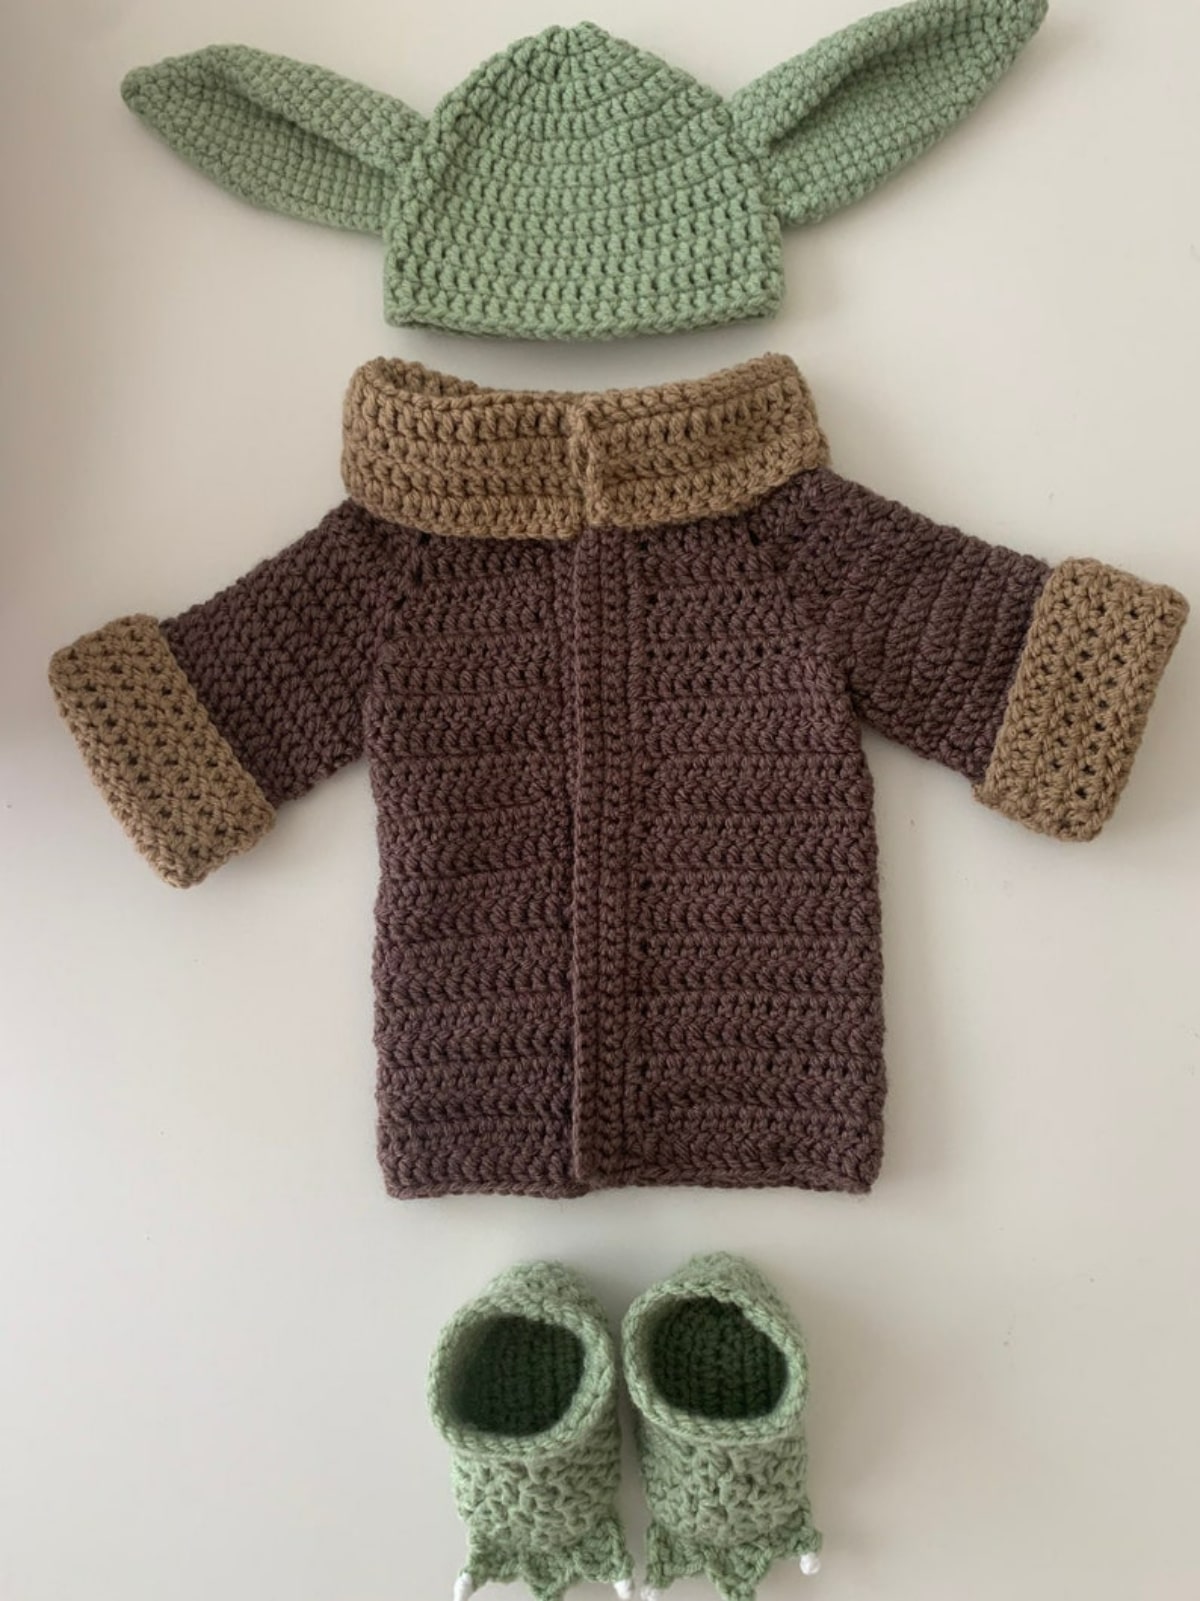  Newborn crochet baby Yoda costume with a green hat, dark brown robe, with a light brown collar and cuffs, and green booties with white claws.